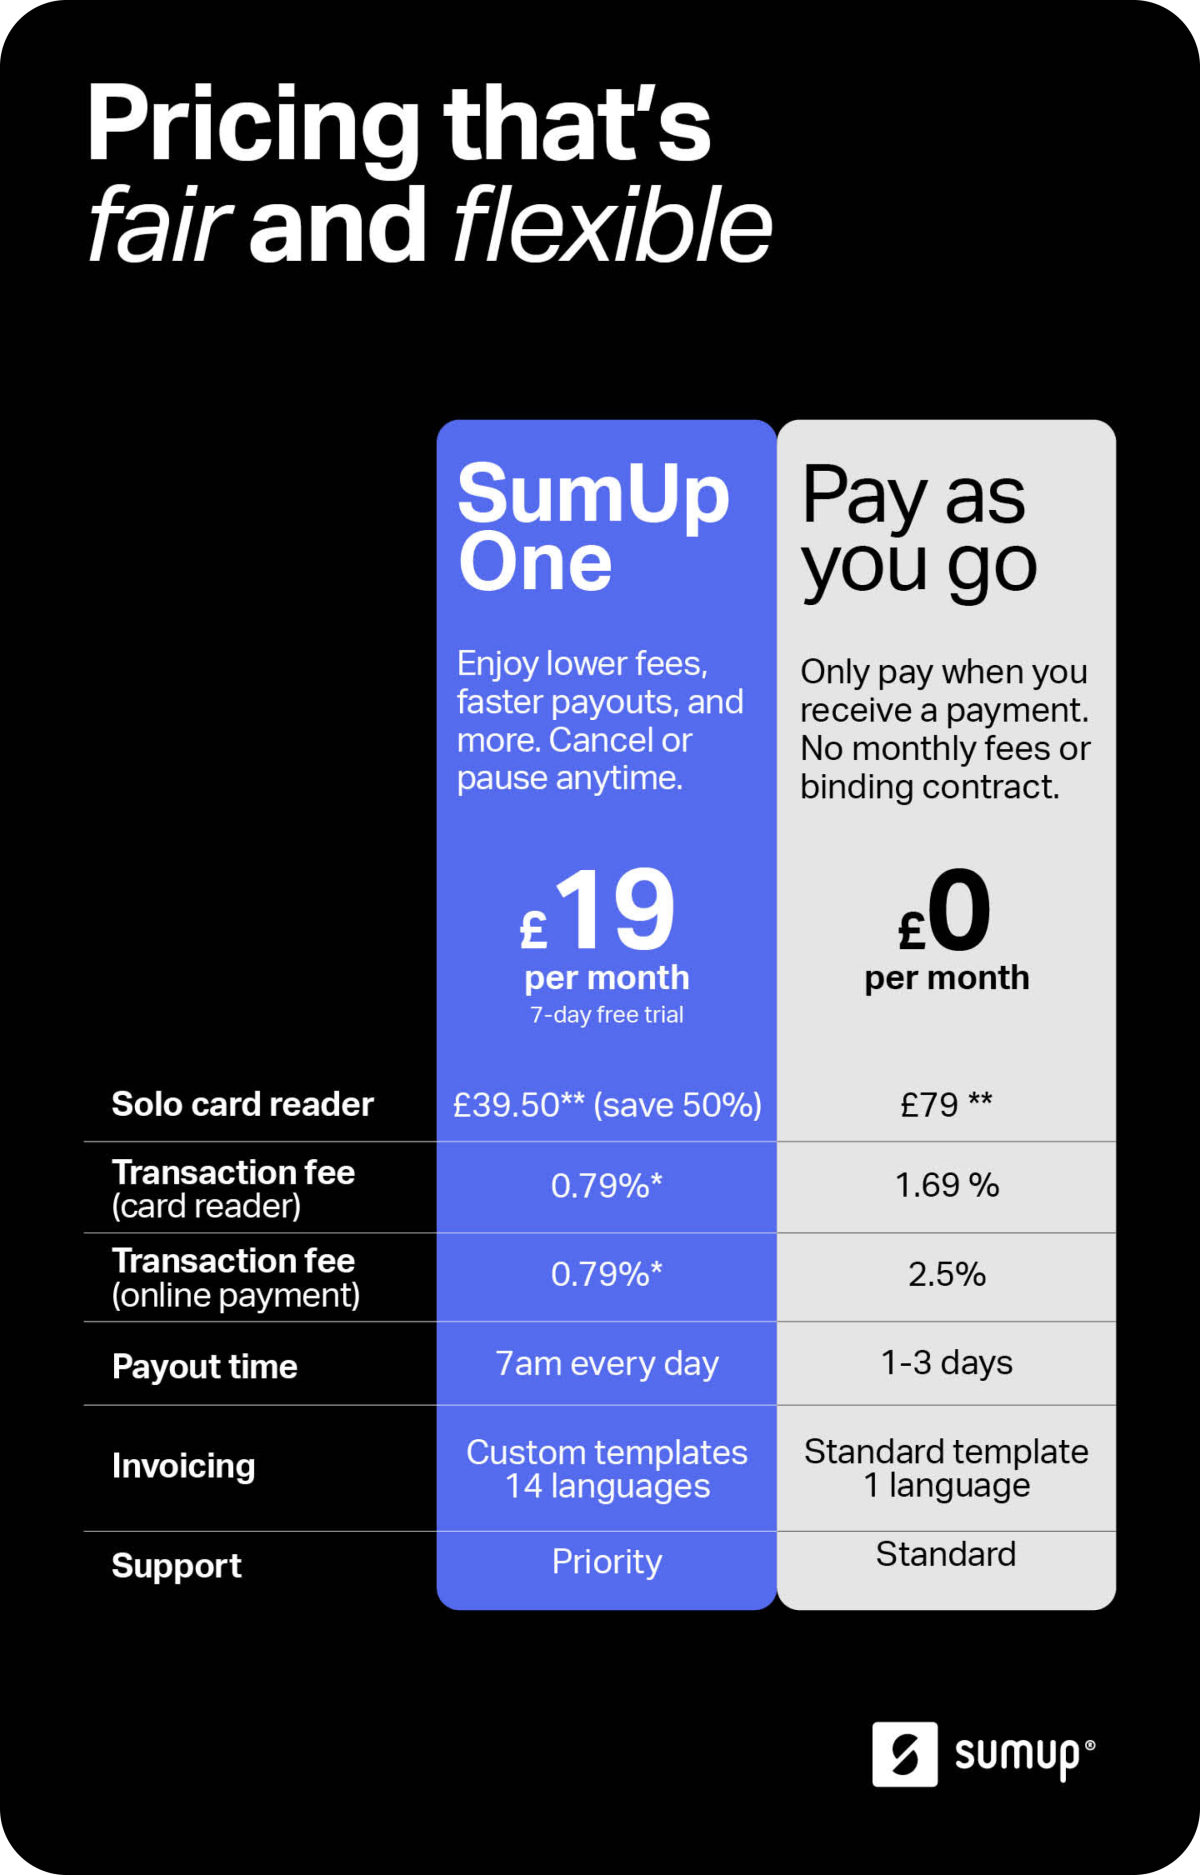 Image showing the differences between the SumUp One plan and the Pay-as-you-go option. With SumUp One, you save 50% on a SumUp Solo card reader, over 50% on transaction fees, you get next day payouts every day, full invoicing software and priority support.